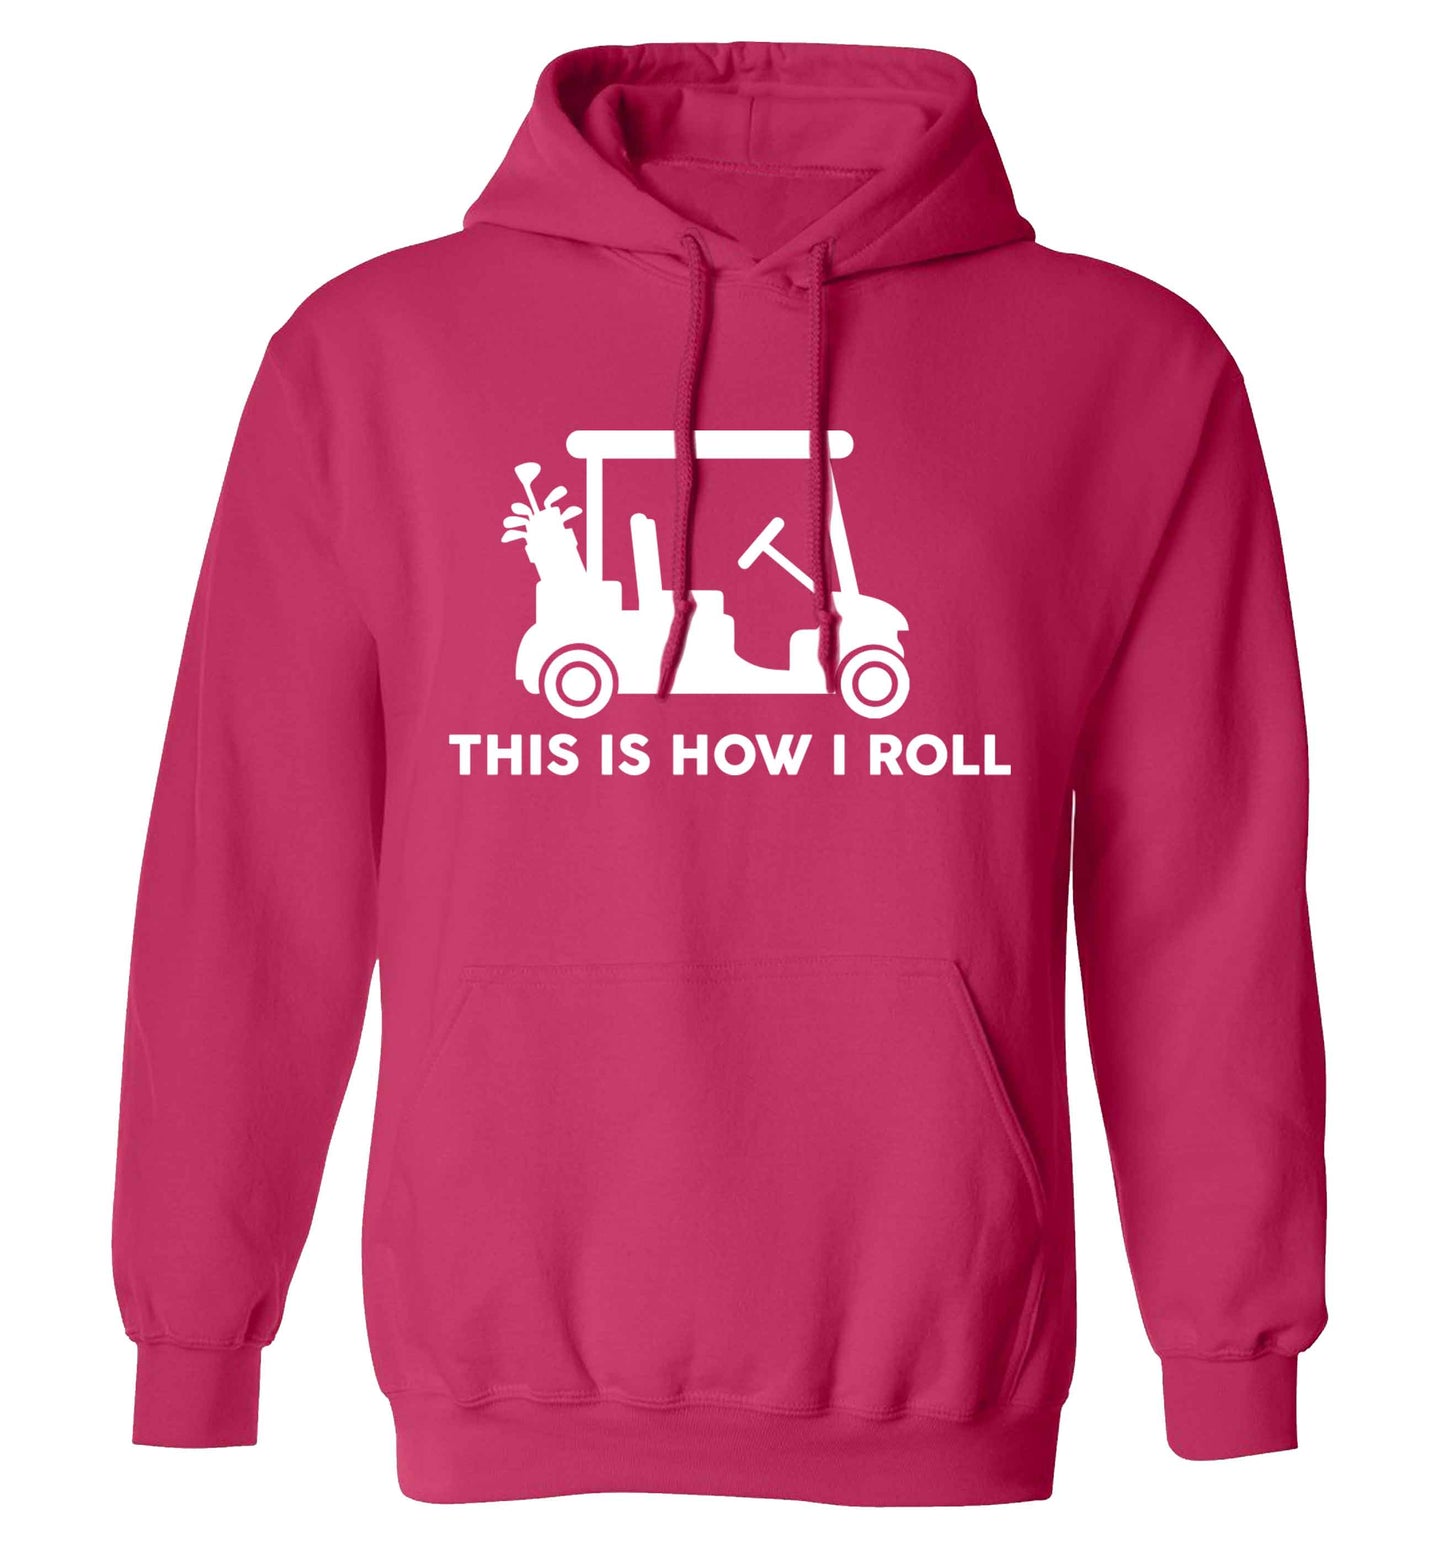 This is how I roll golf cart adults unisex pink hoodie 2XL